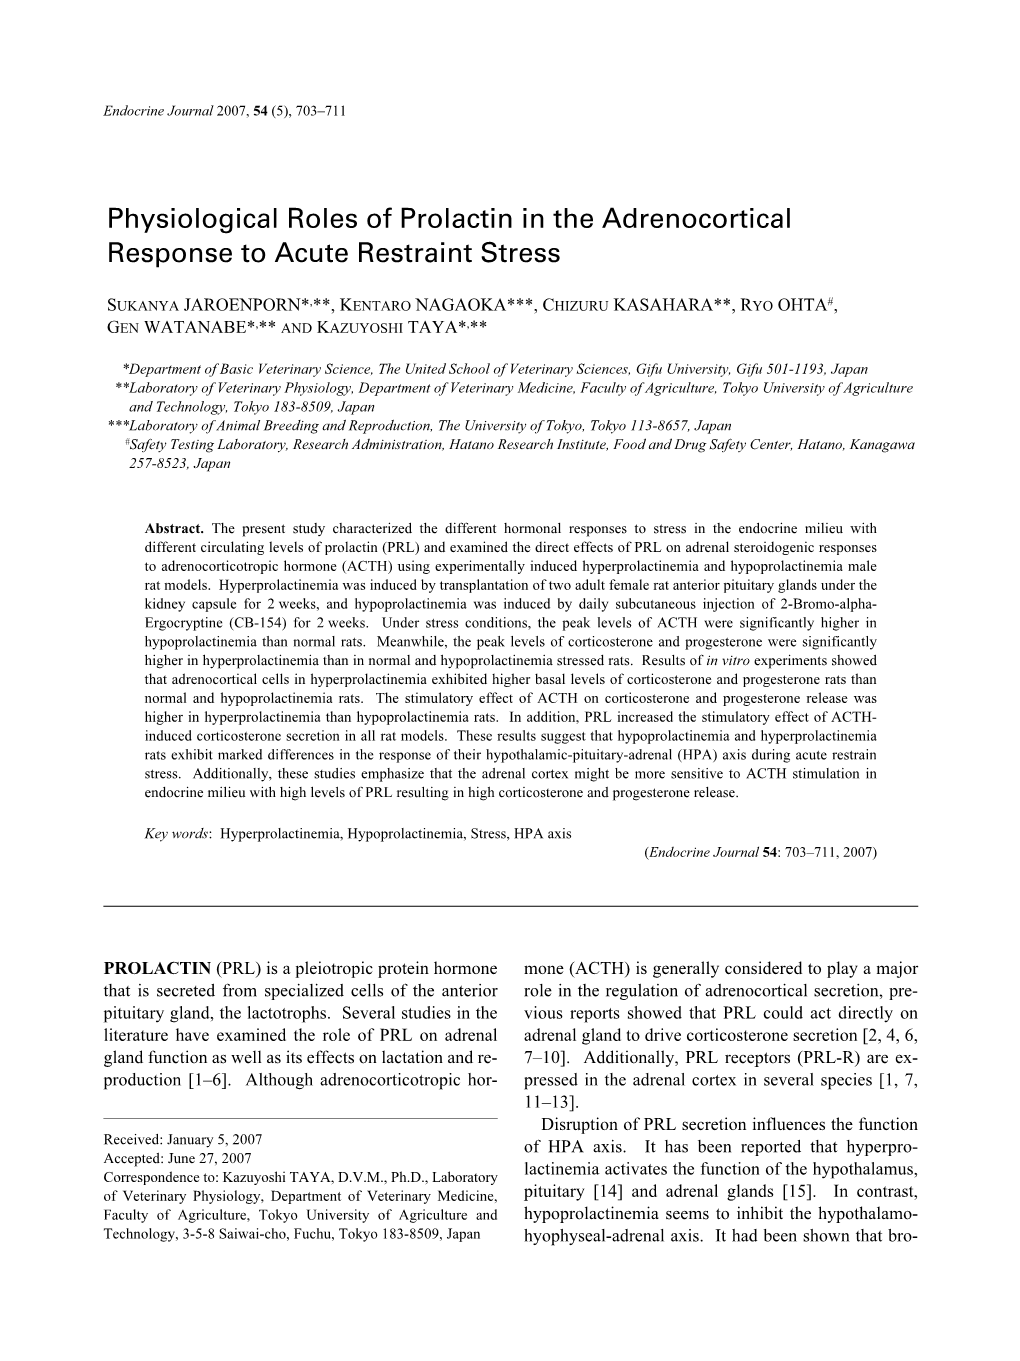 Physiological Roles of Prolactin in the Adrenocortical Response to Acute Restraint Stress